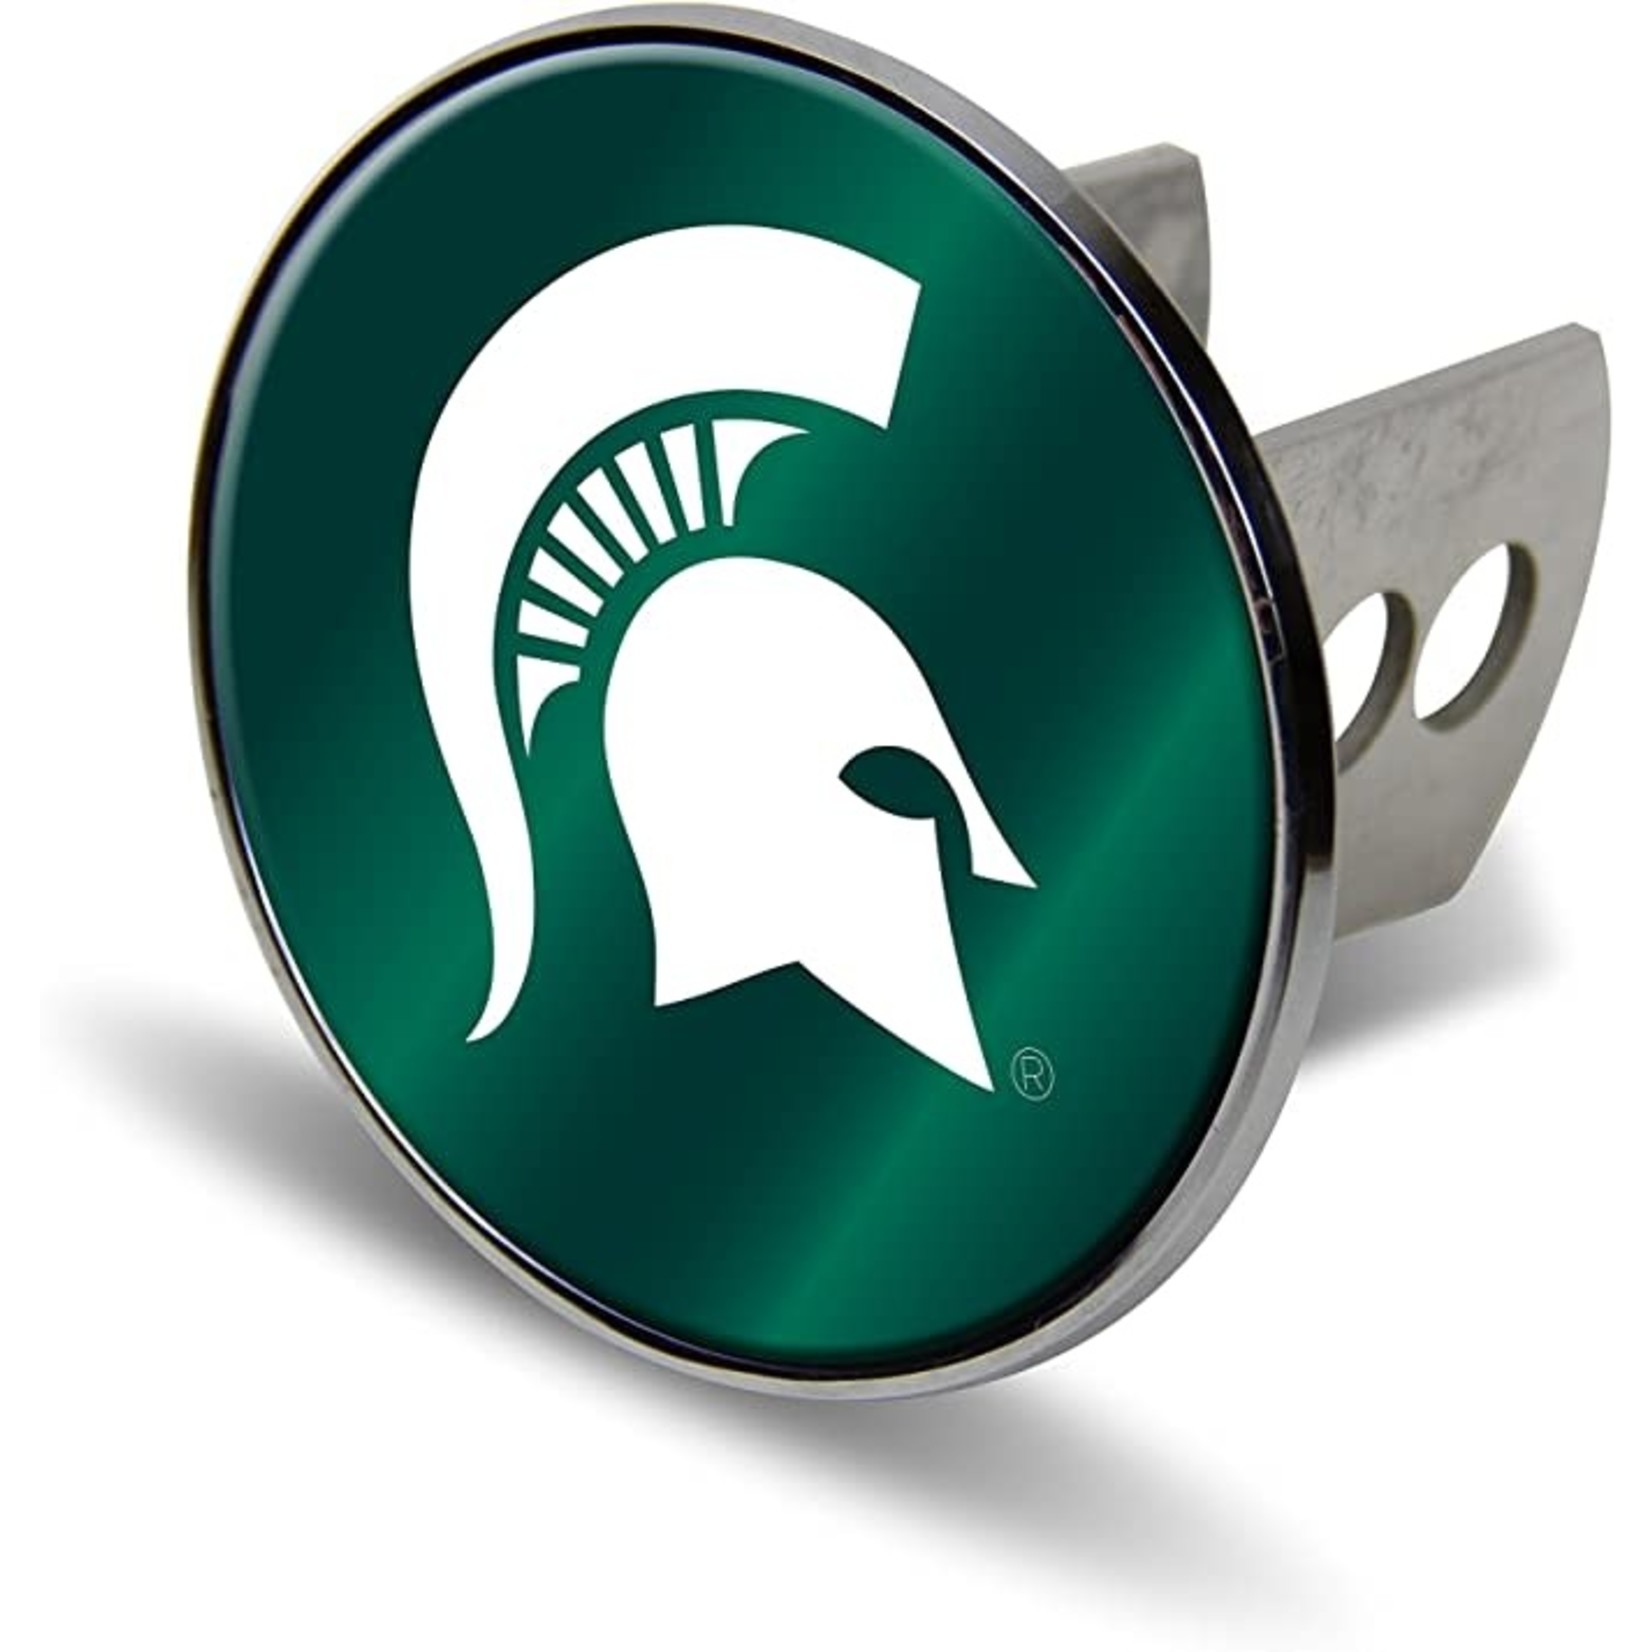 Rico NCAA Michigan State Spartans Laser Cut Metal Hitch Cover, Large, Silver